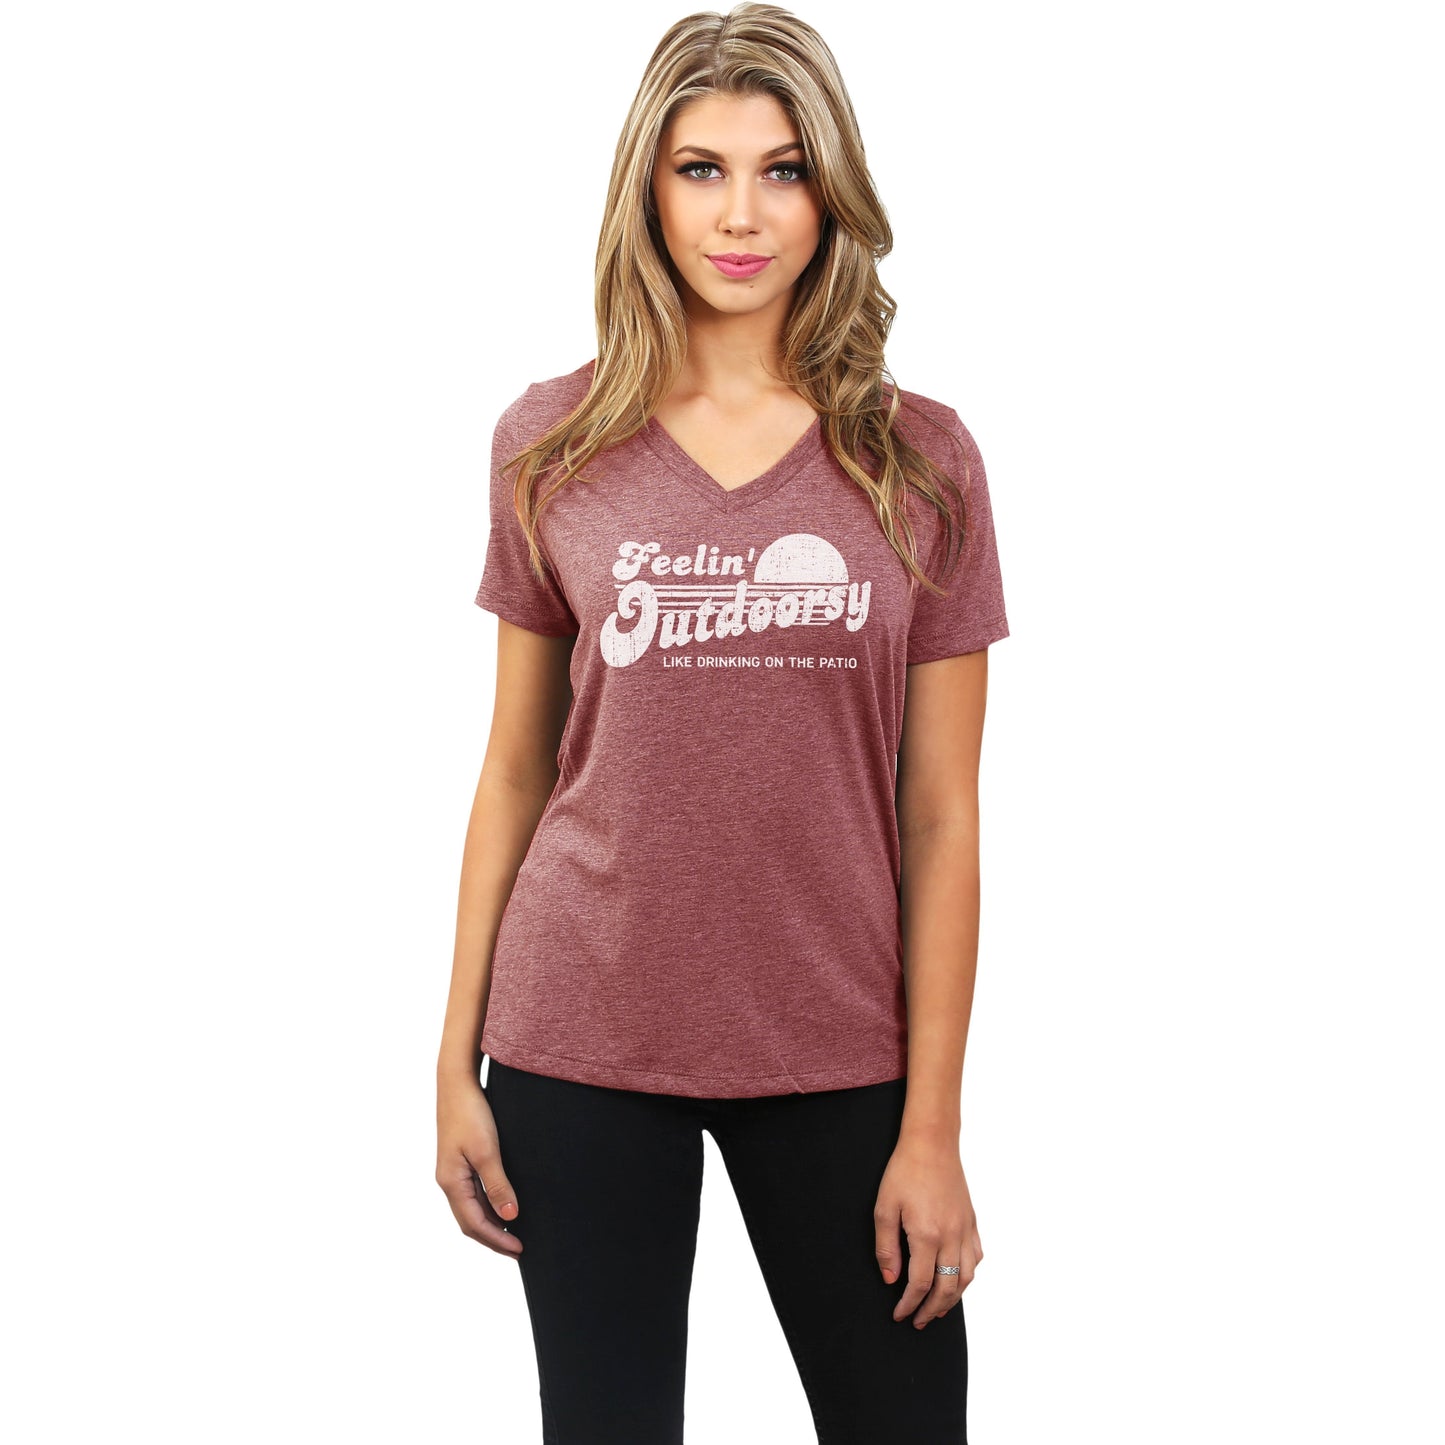 Feelin Outdoorsy Like Drinking On The Patio Women's Relaxed Crewneck T-Shirt Top Tee Heather Rouge Model
